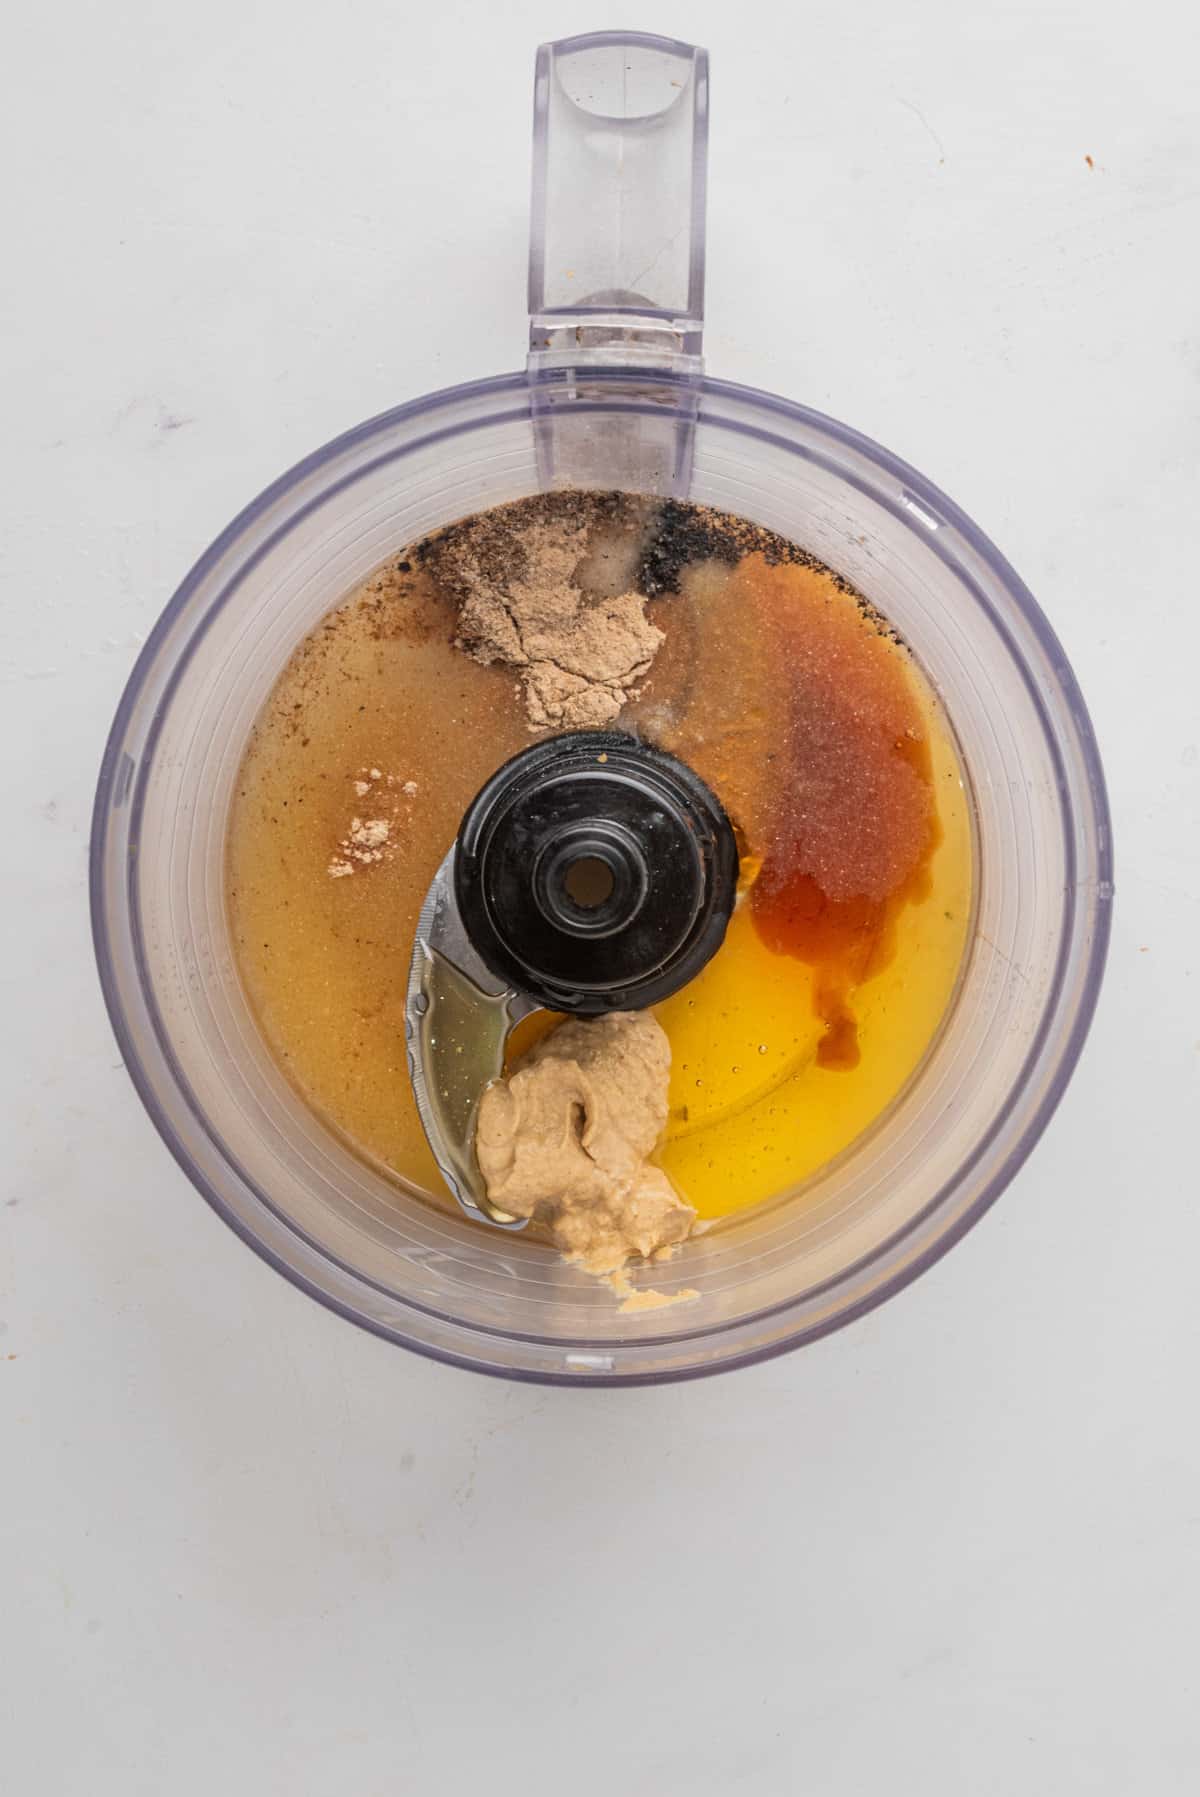 An image of the ingredients of the salad dressing in a blender.